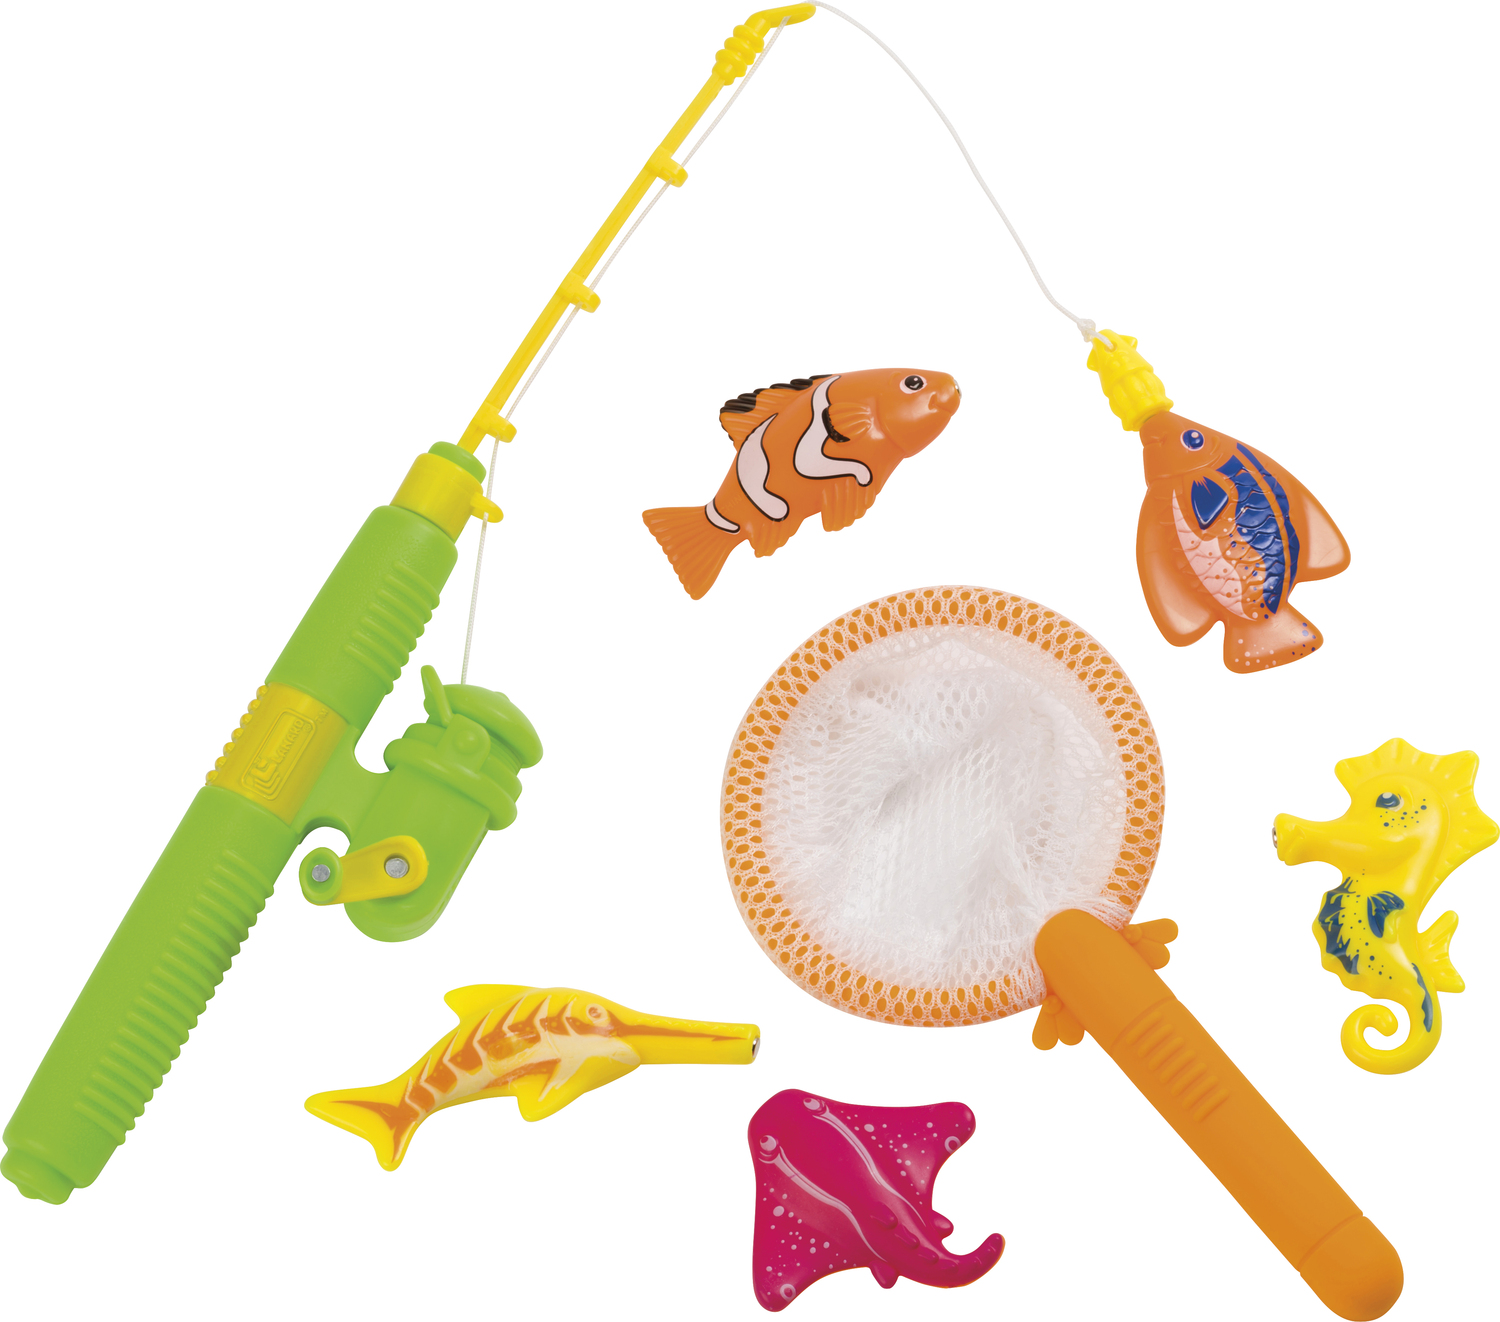 SPKART Magnetic Fishing Game with Fish Rod Catching Game for Kids Best for  Gift - Magnetic Fishing Game with Fish Rod Catching Game for Kids Best for  Gift . shop for SPKART